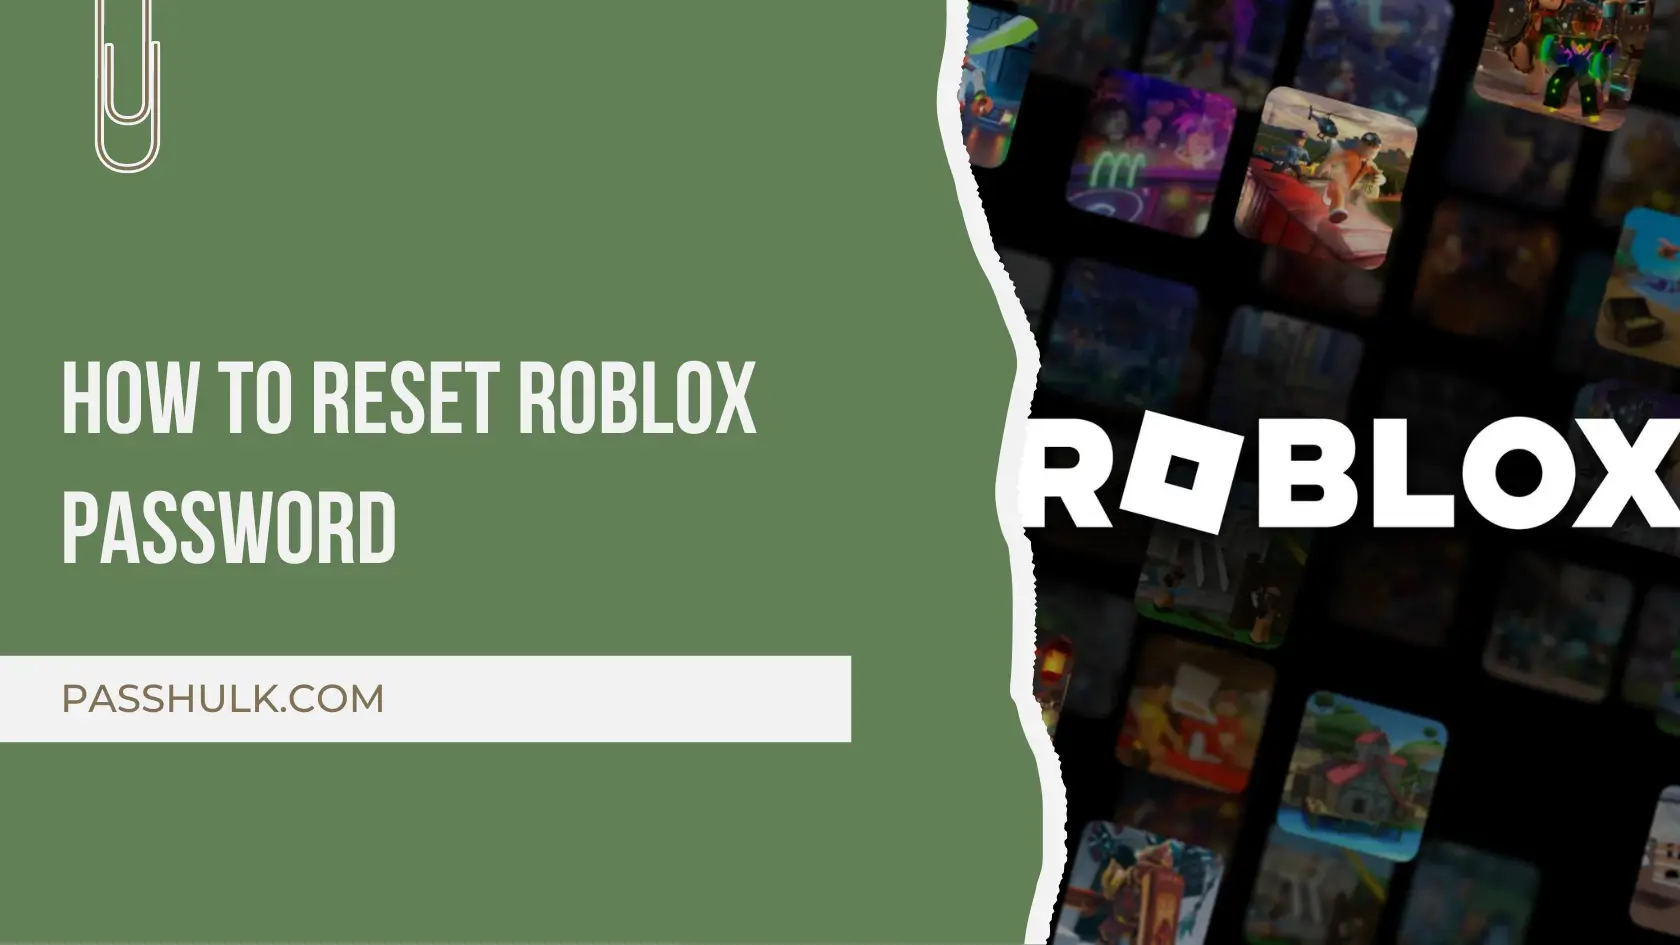 How to Reset Roblox Password - Secure Your Roblox Account